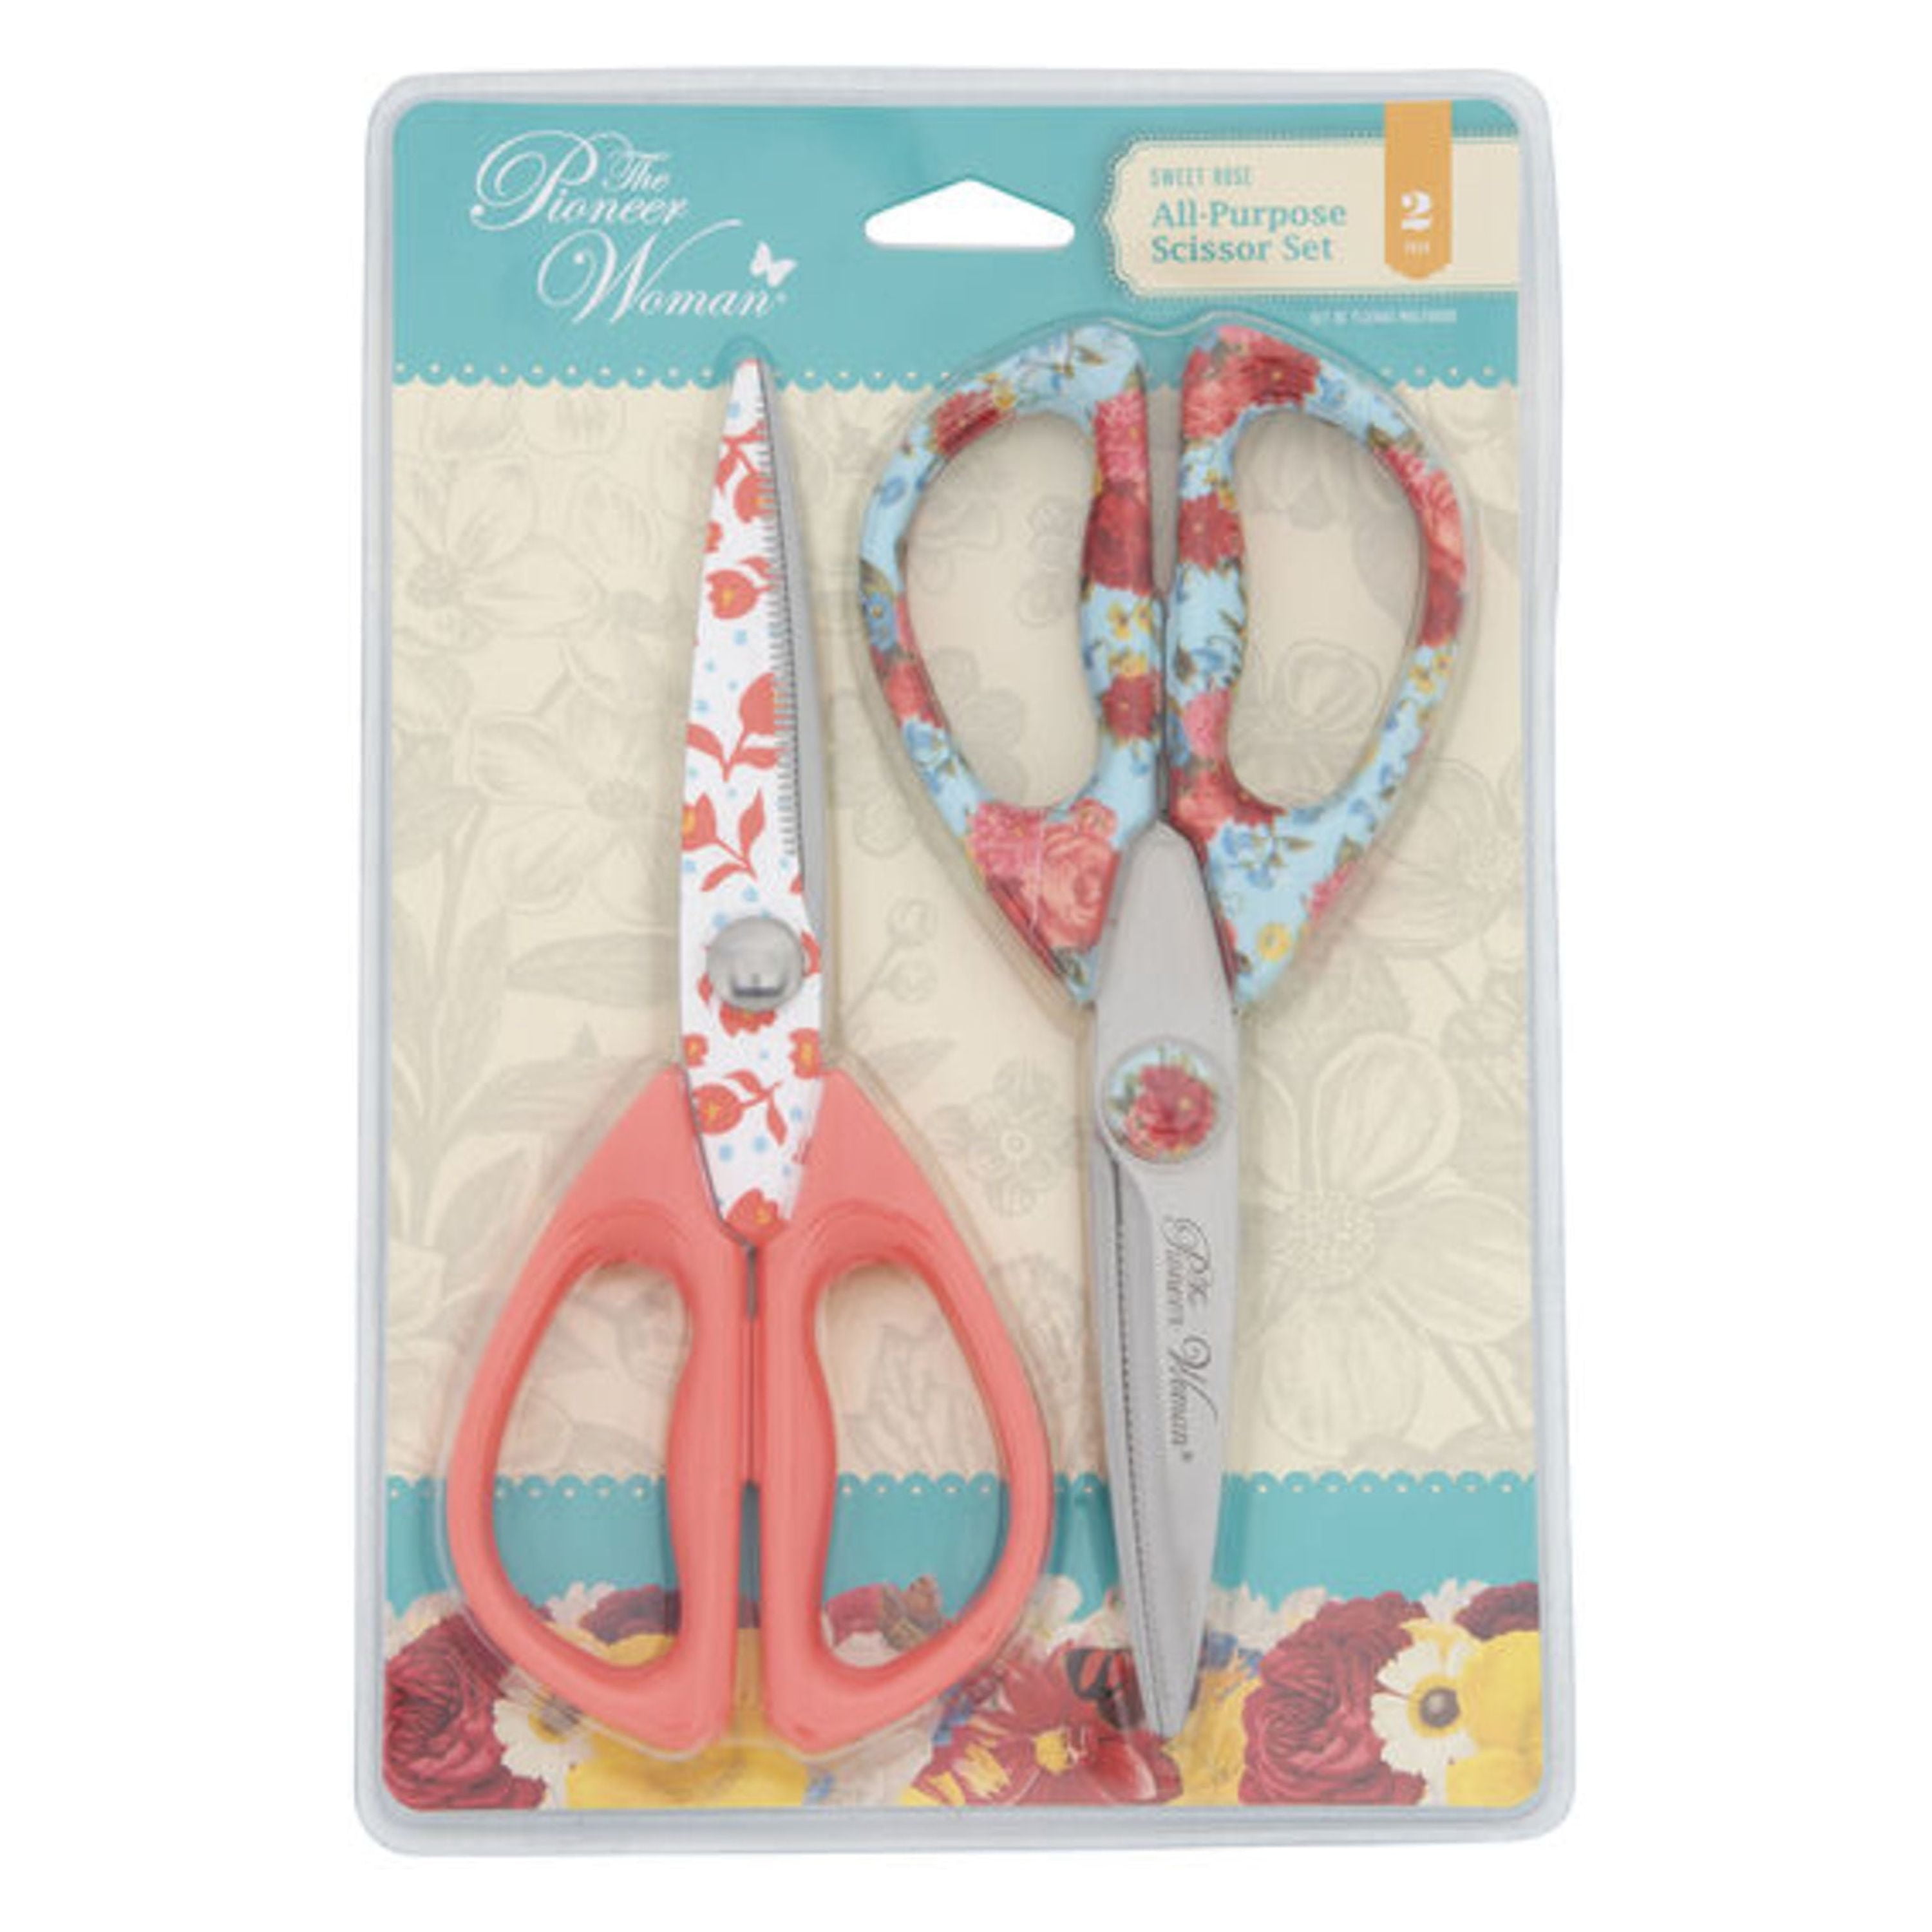 Every client is treated like family. Finding the ZWILLING SHEARS & SCISSORS  MULTI-PURPOSE KITCHEN SHEARS - RED Tanager Housewares to meet the needs of  people is our passion